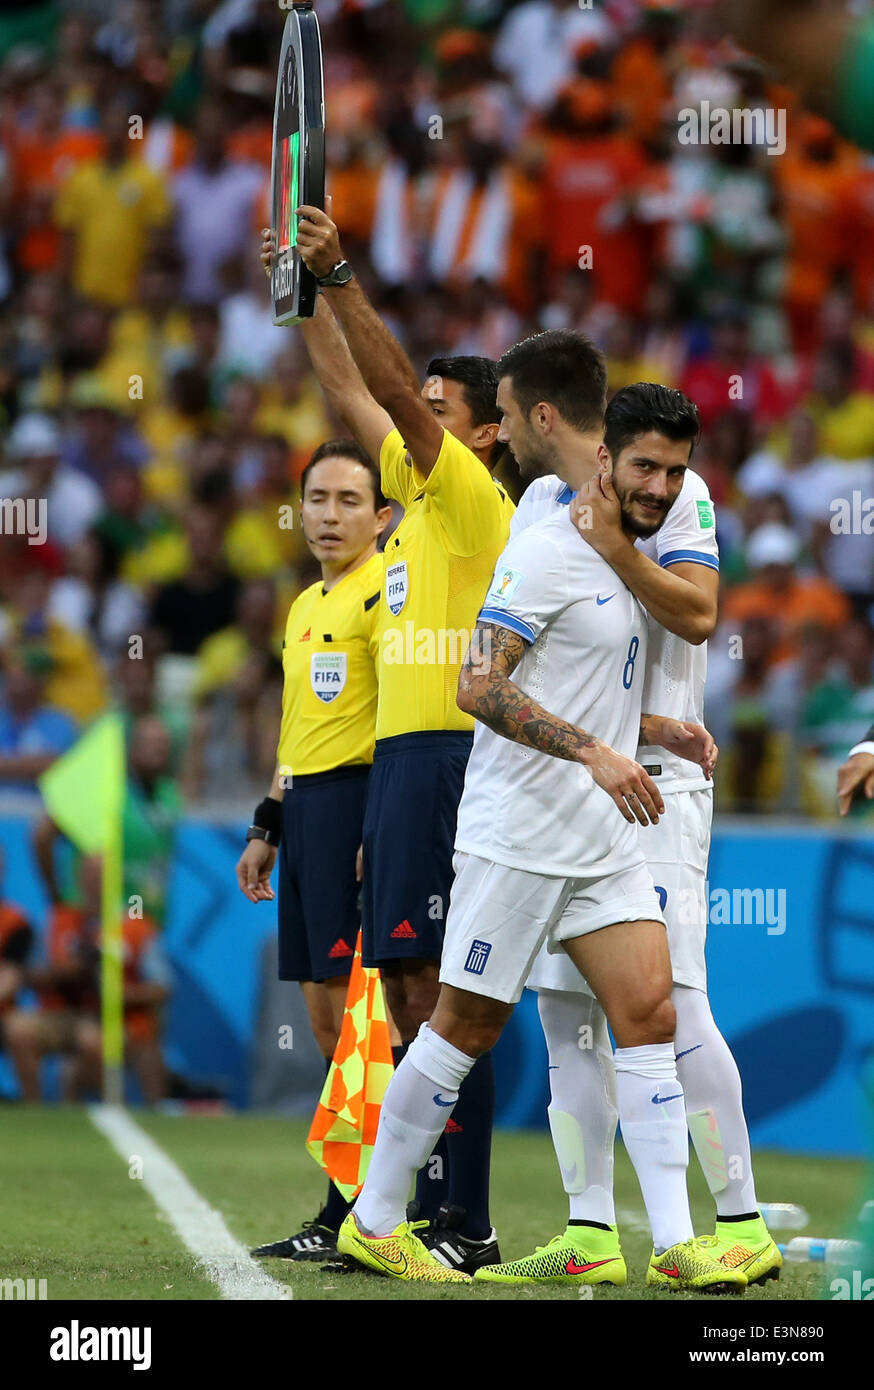 Fortaleza, Brazil. 24th June, 2014. Greece's Panagiotis Kone (front) is replaced due to injury during a Group C match between Greece and Cote d'Ivoire of 2014 FIFA World Cup at the Estadio Castelao Stadium in Fortaleza, Brazil, June 24, 2014. Credit:  Cao Can/Xinhua/Alamy Live News Stock Photo